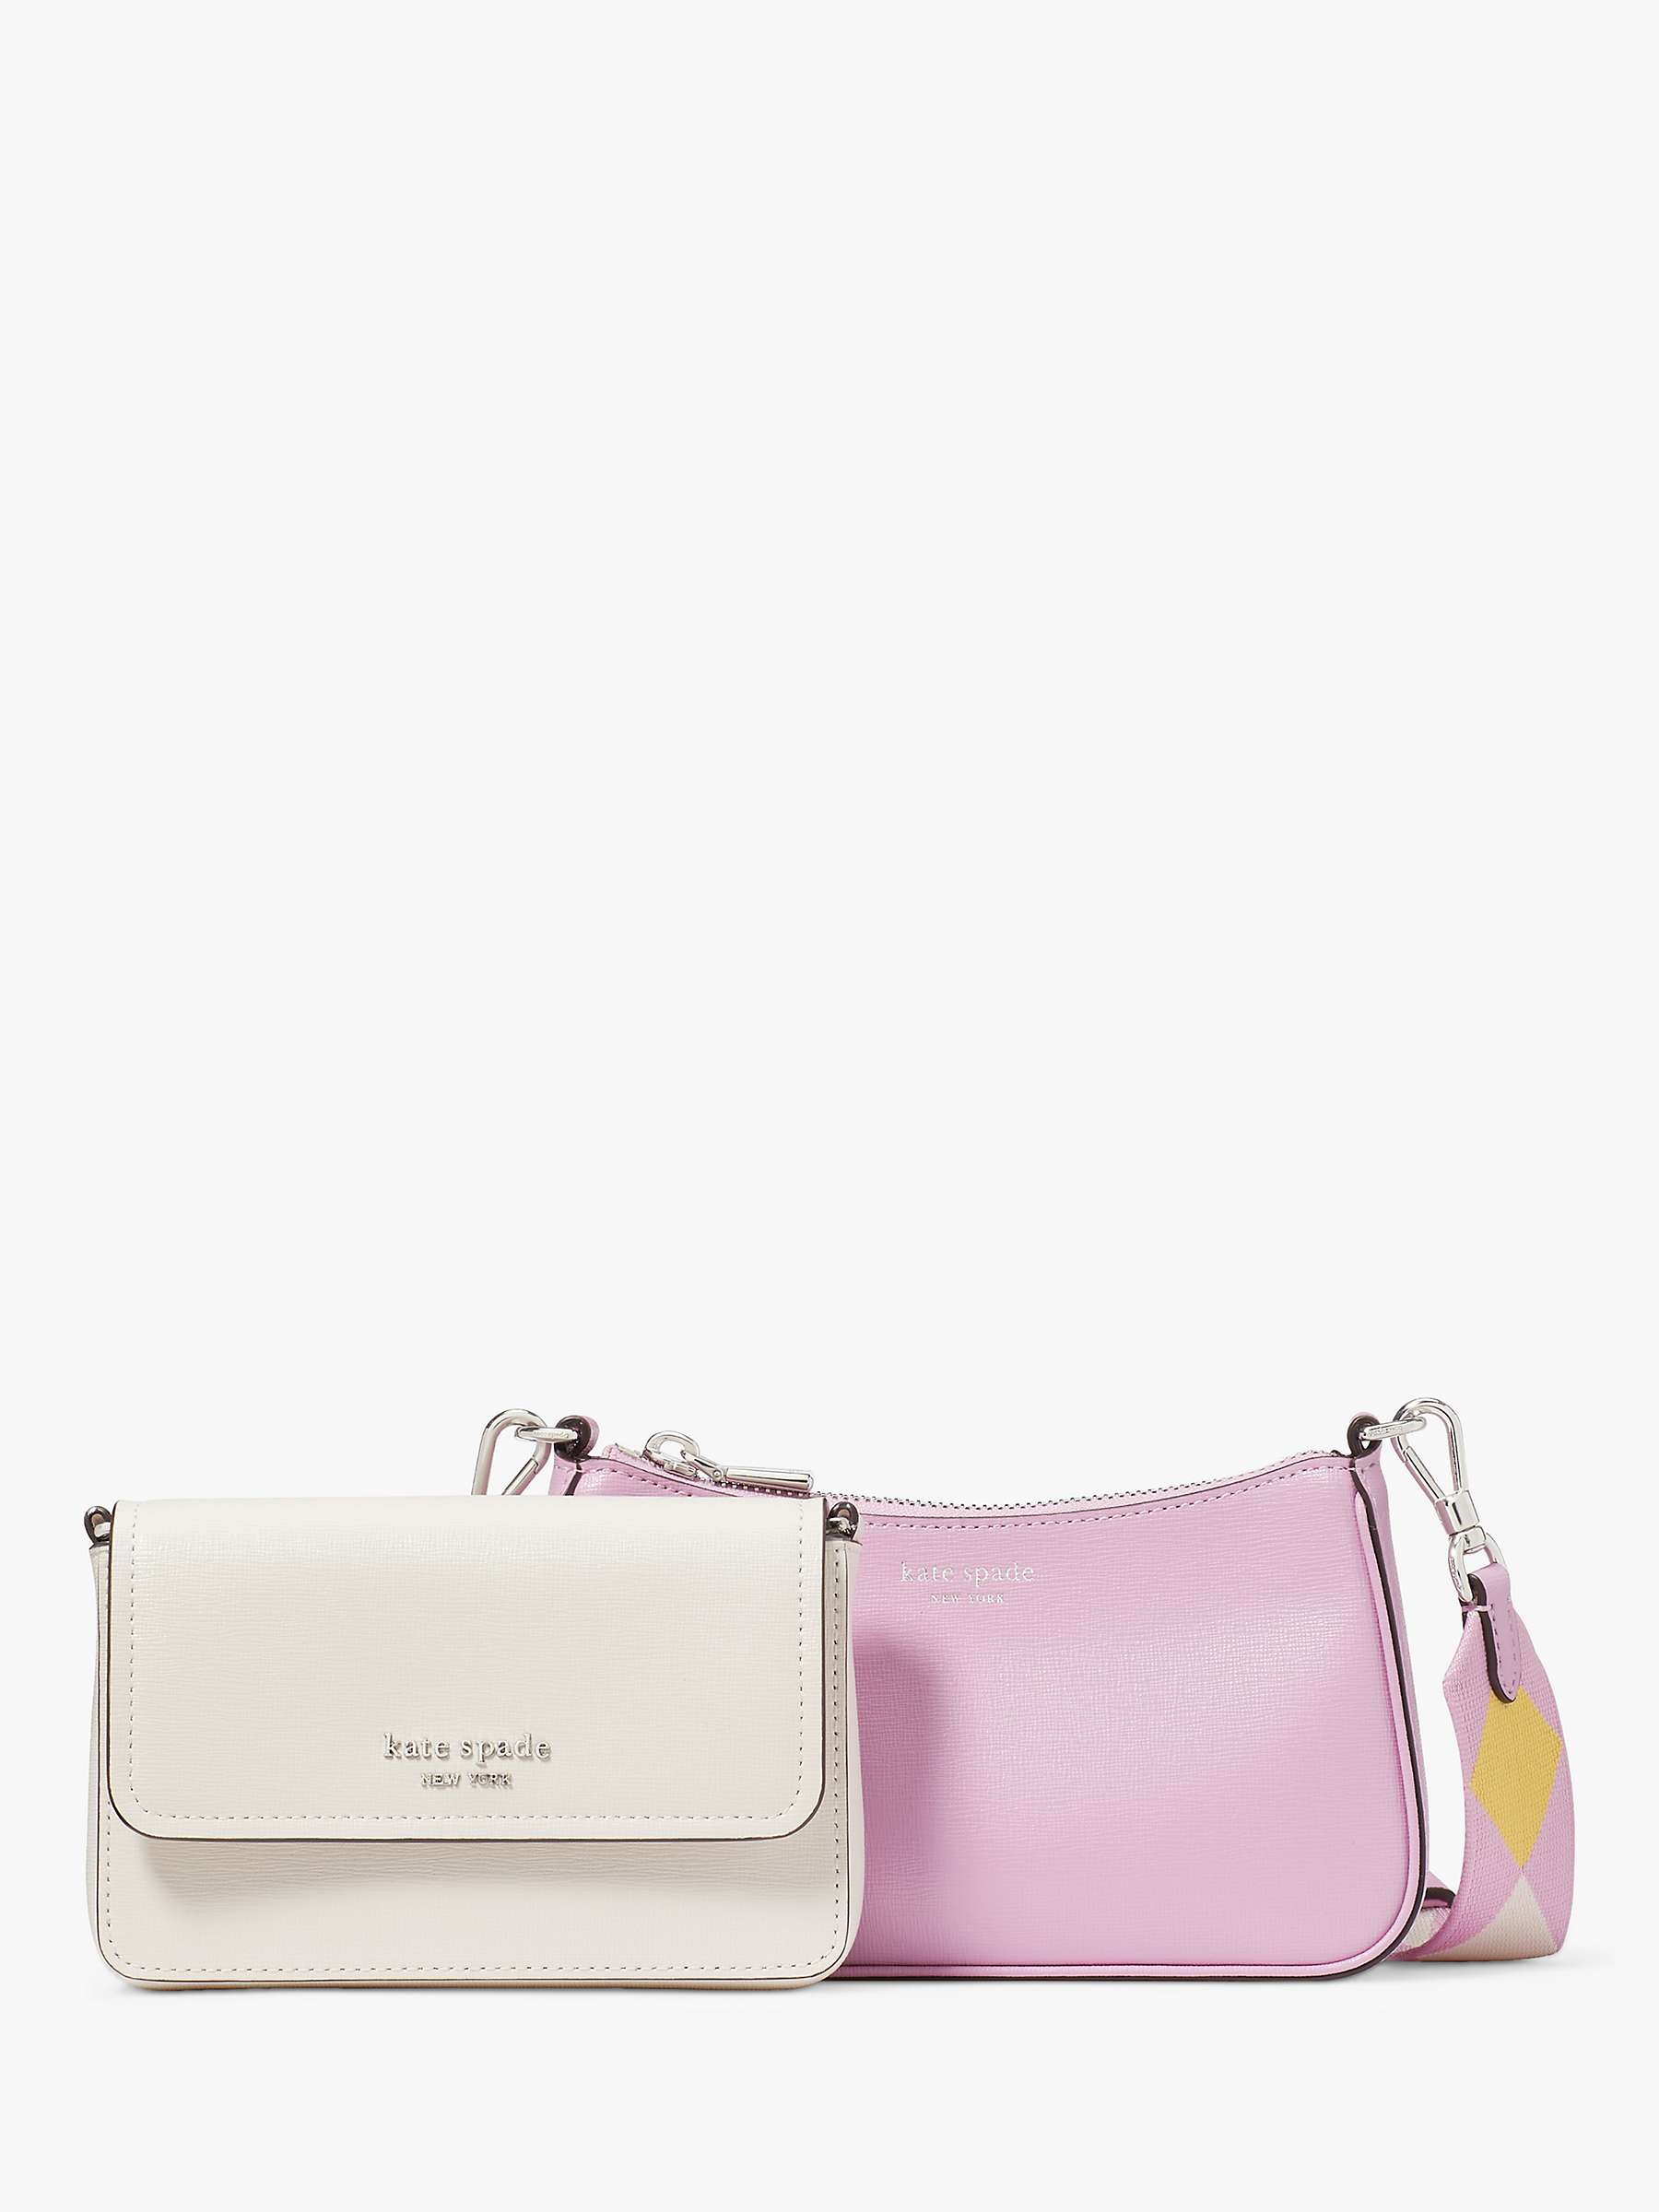 Buy kate spade new york Double Up Leather Cross Body Bag, Parchment/Multi Online at johnlewis.com